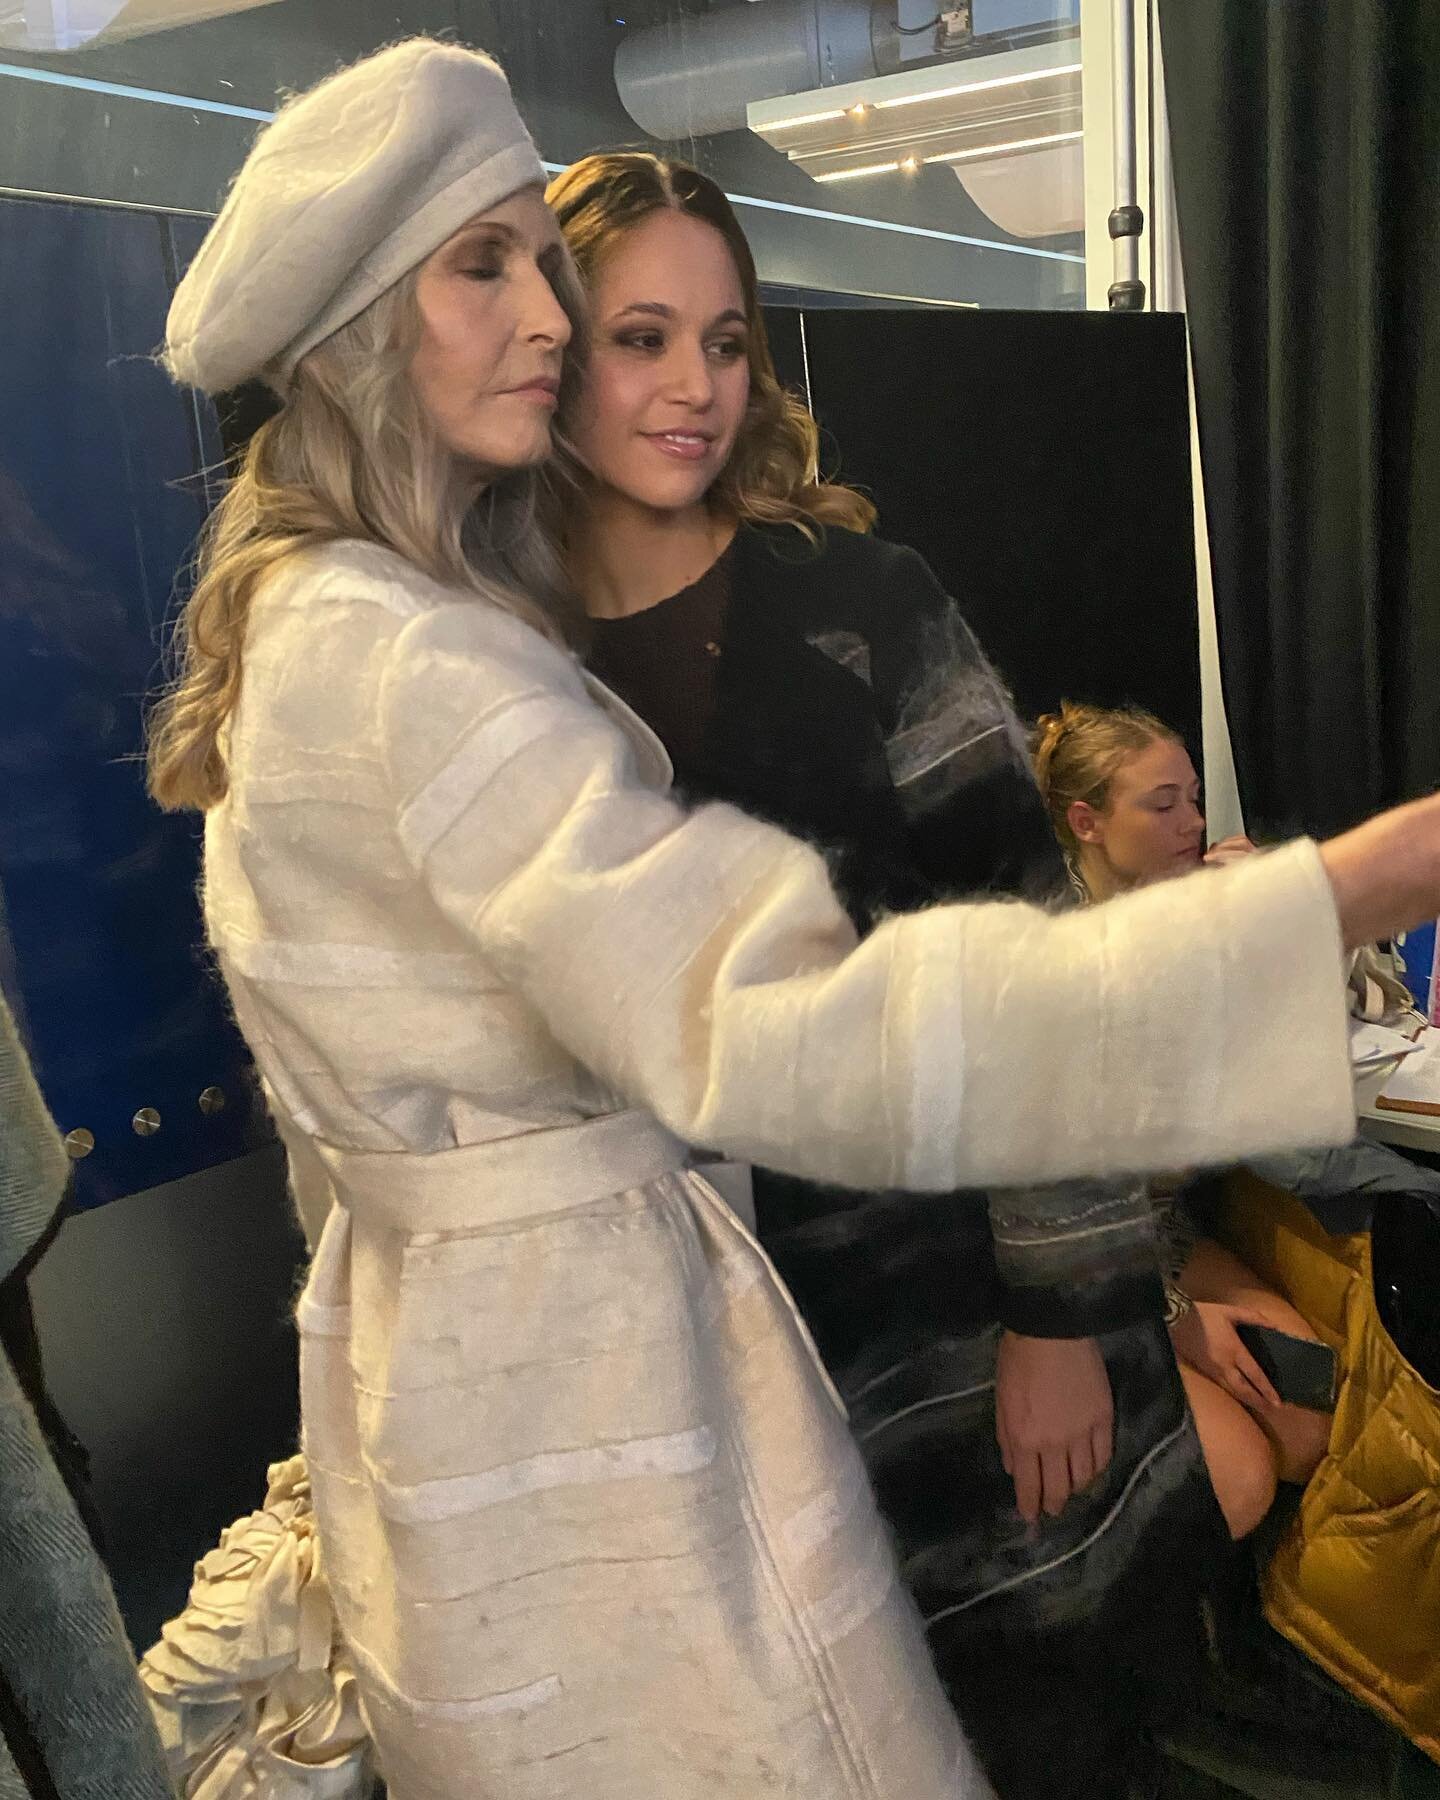 Amanda Bransgrove and her beautiful daughter Yasmin, modelling for Liz Mitchell NZFW23 Winter24 runway show. Thank you- Amanda has modelled for Liz since the first NZFW, and just gets better with age. #lizmitchell #nzfw23 #choosewool #motheranddaught